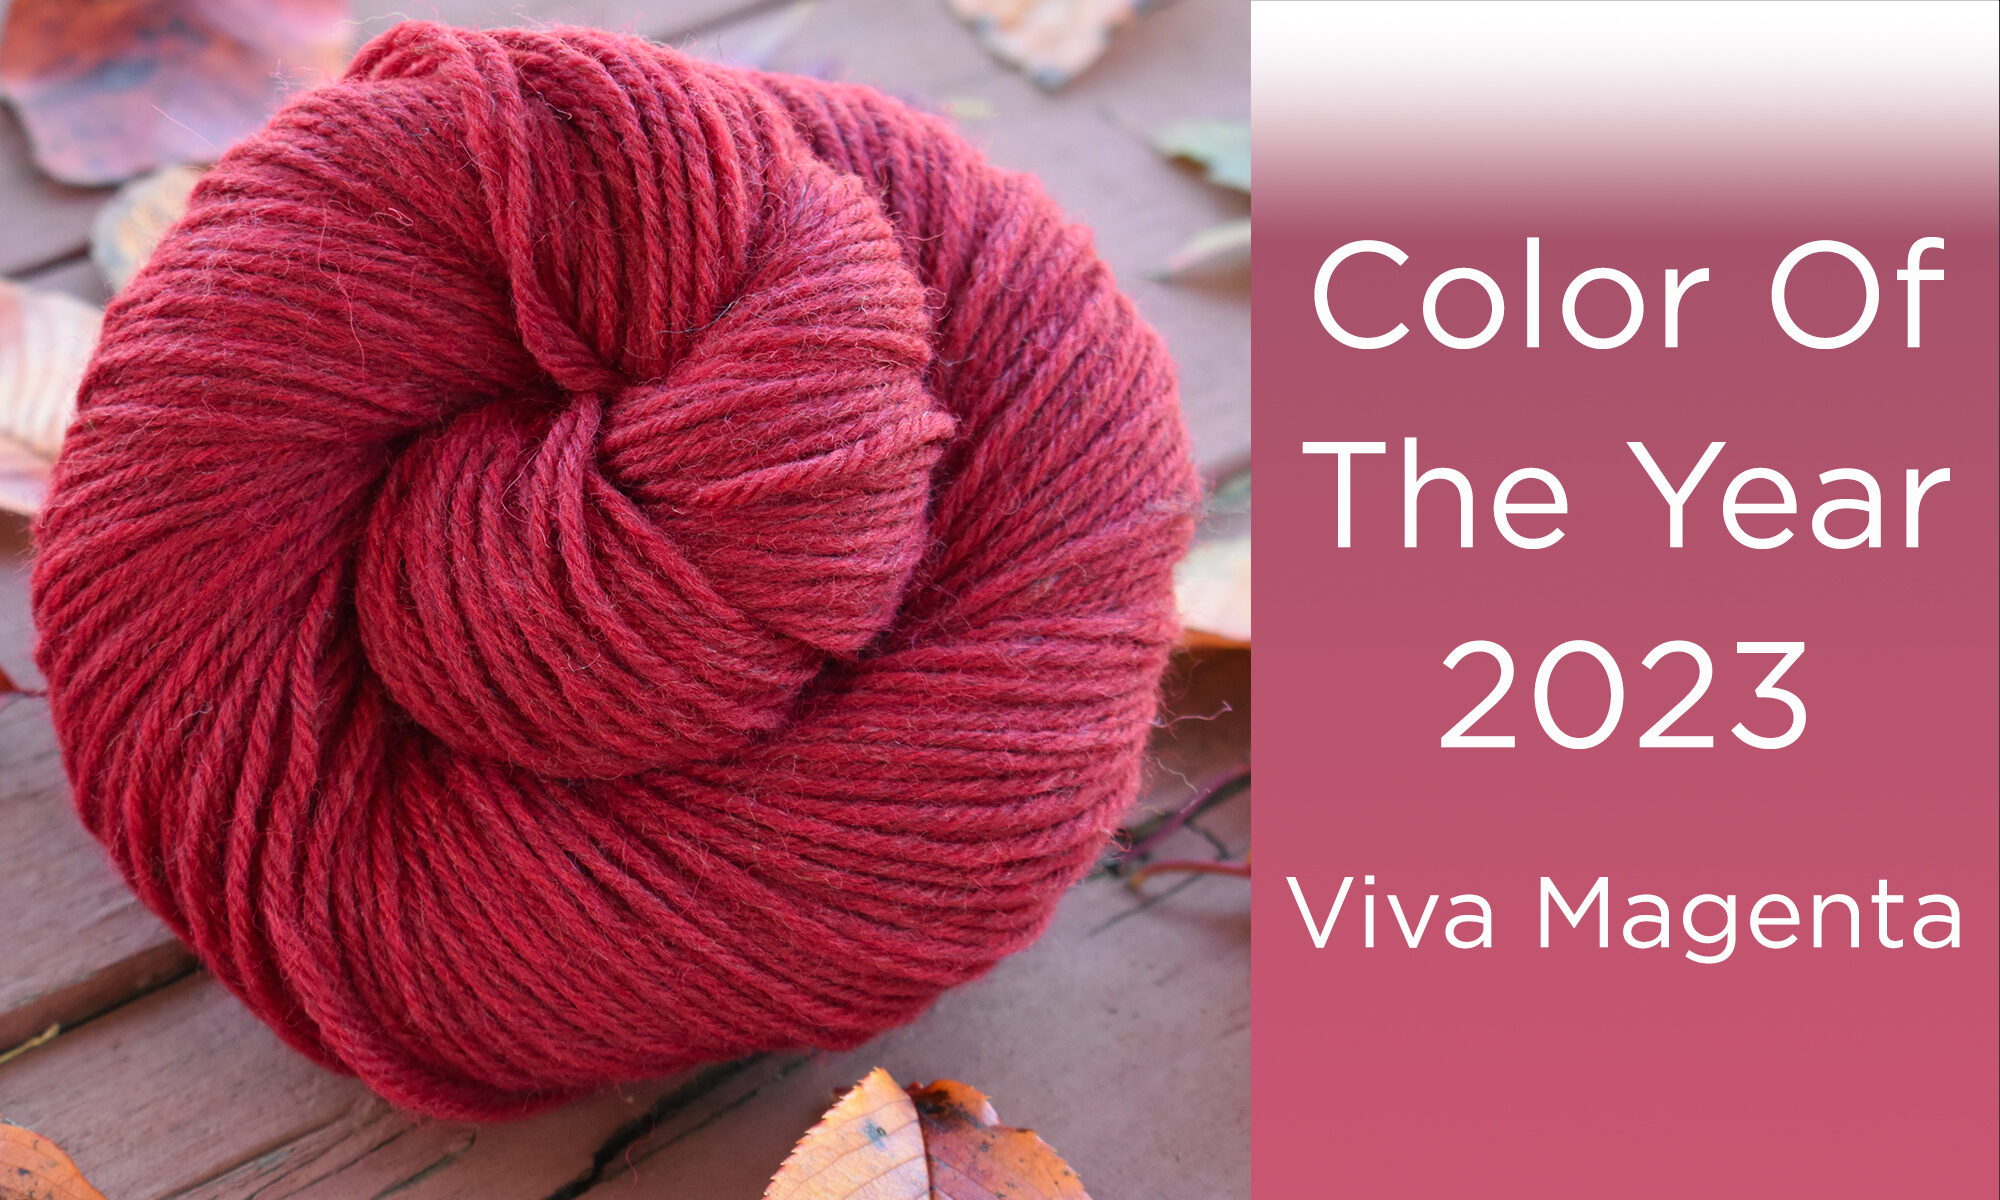 Introducing the 2023 Color of the Year: Viva Magenta - Stuller Blog